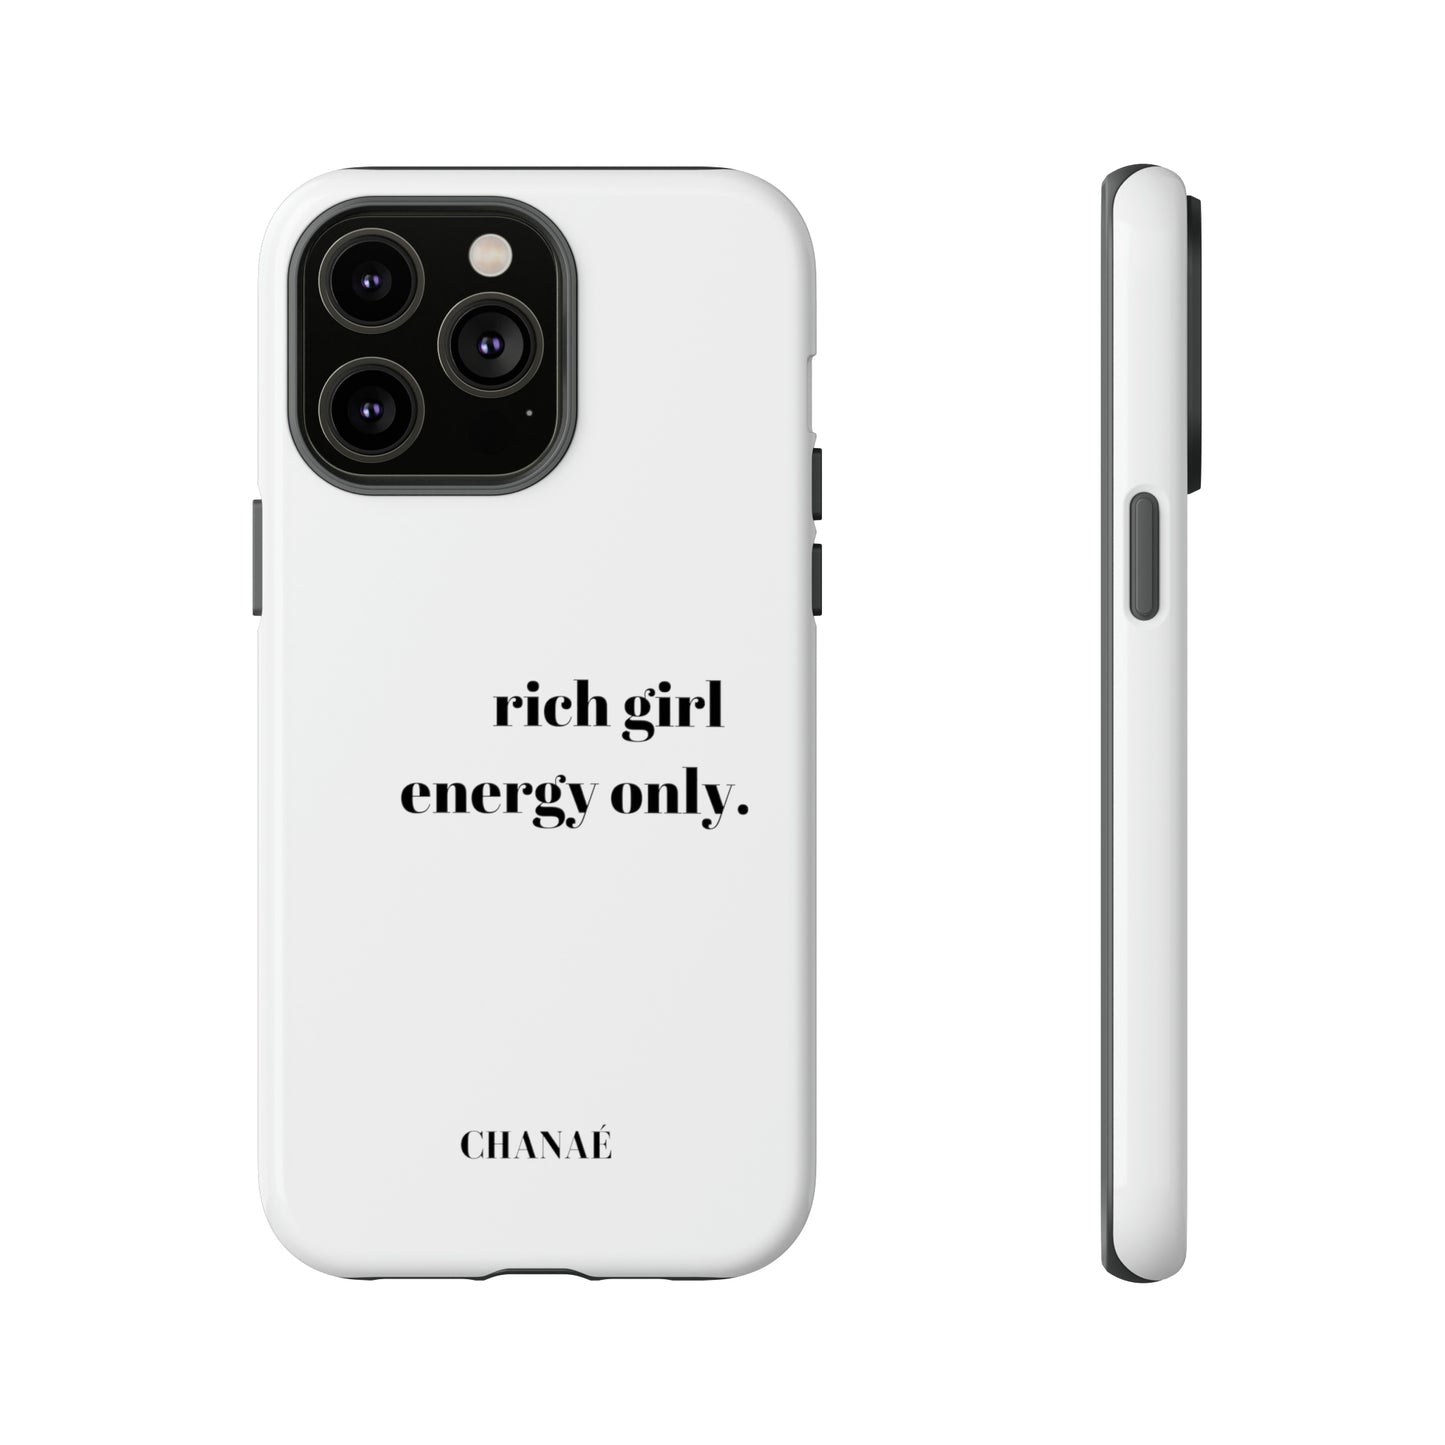 Rich Girl Energy Only iPhone "Tough" Case (White)